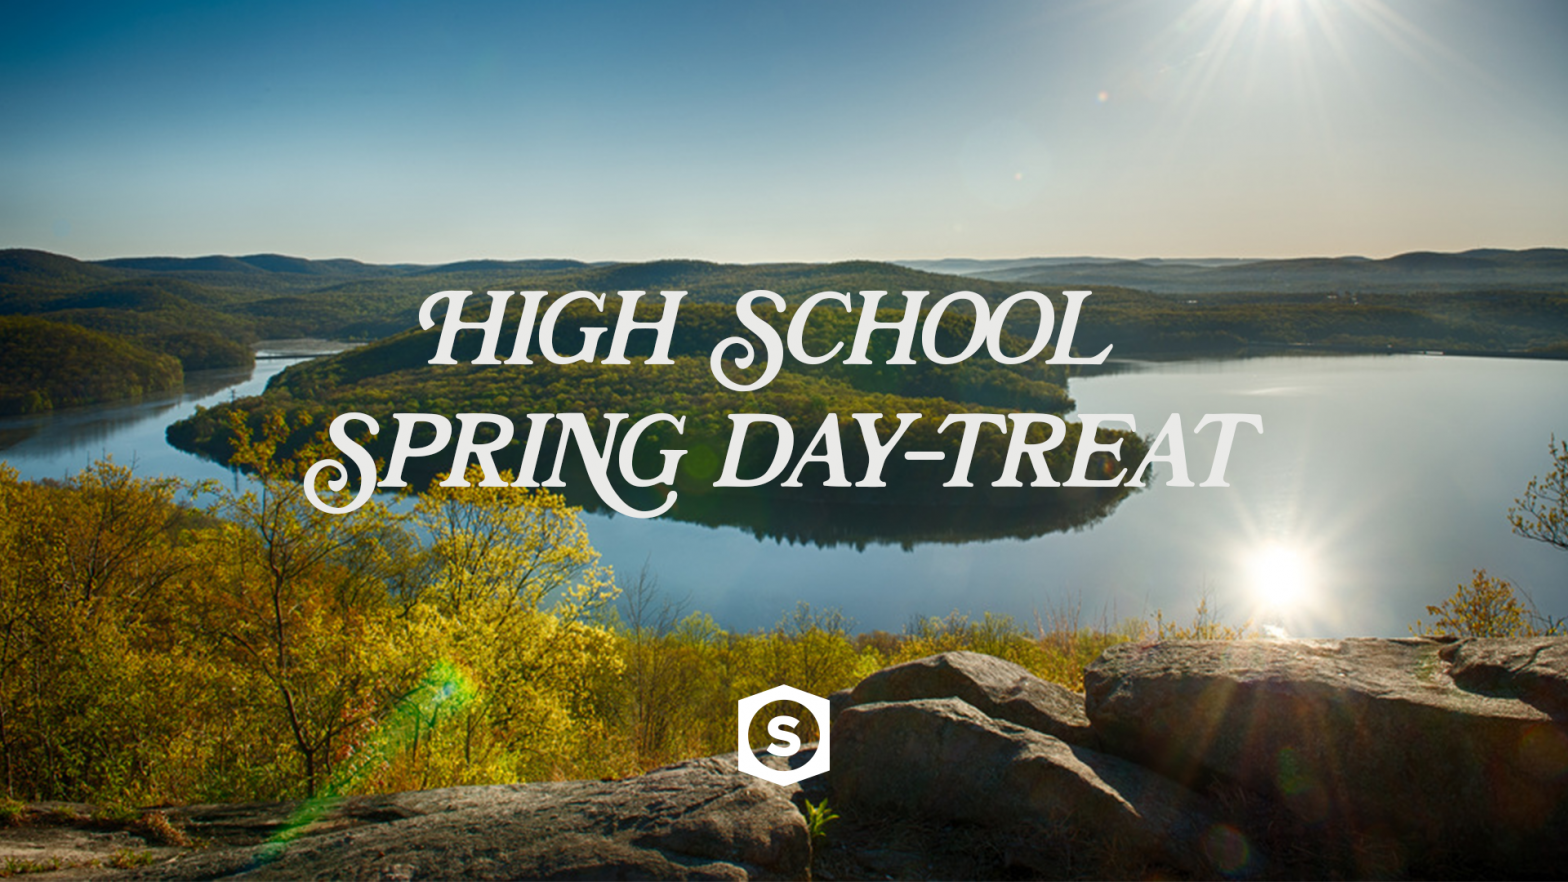 High School Spring Day-treat event image